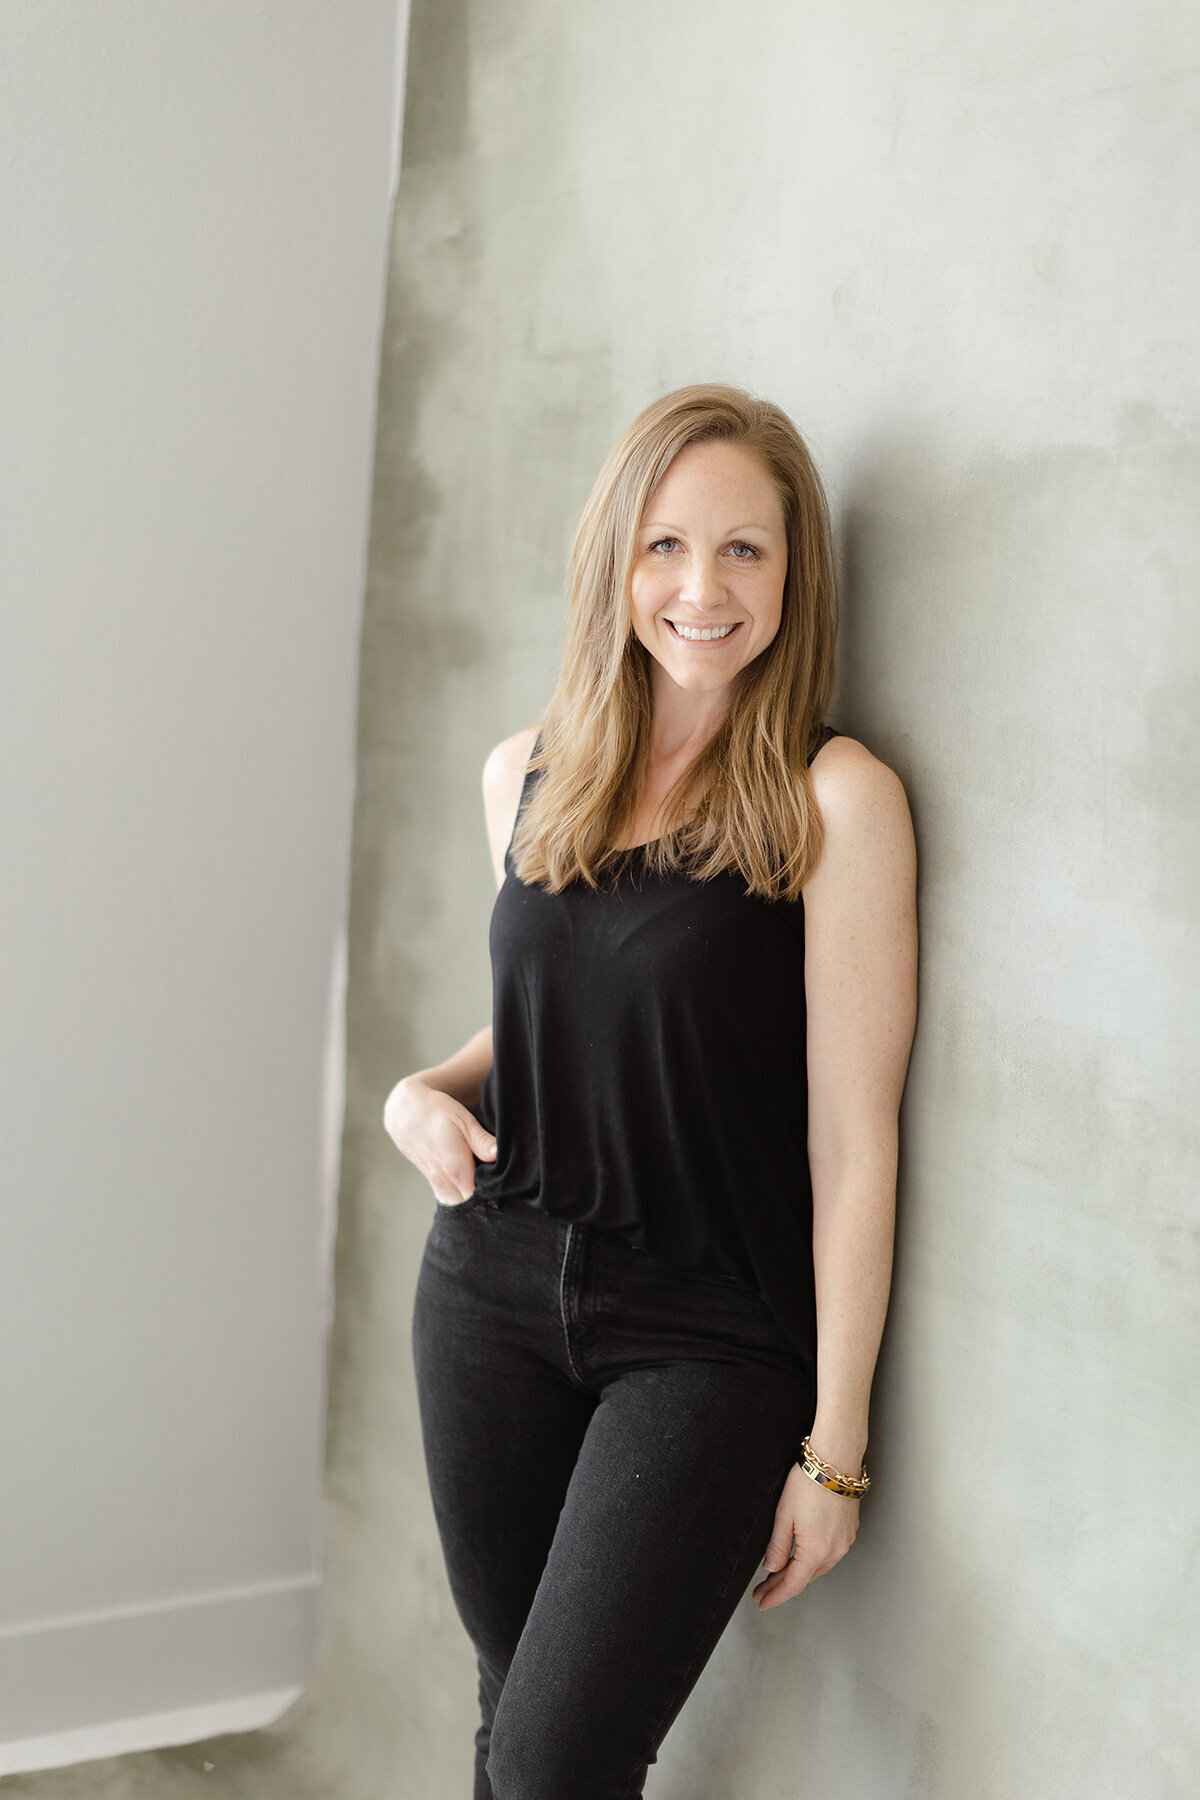 Professional headshot photo of a DFW business woman leaning against the wall in a Dallas photography studio as she has one hand in her pocket looking at the photographer smiling.